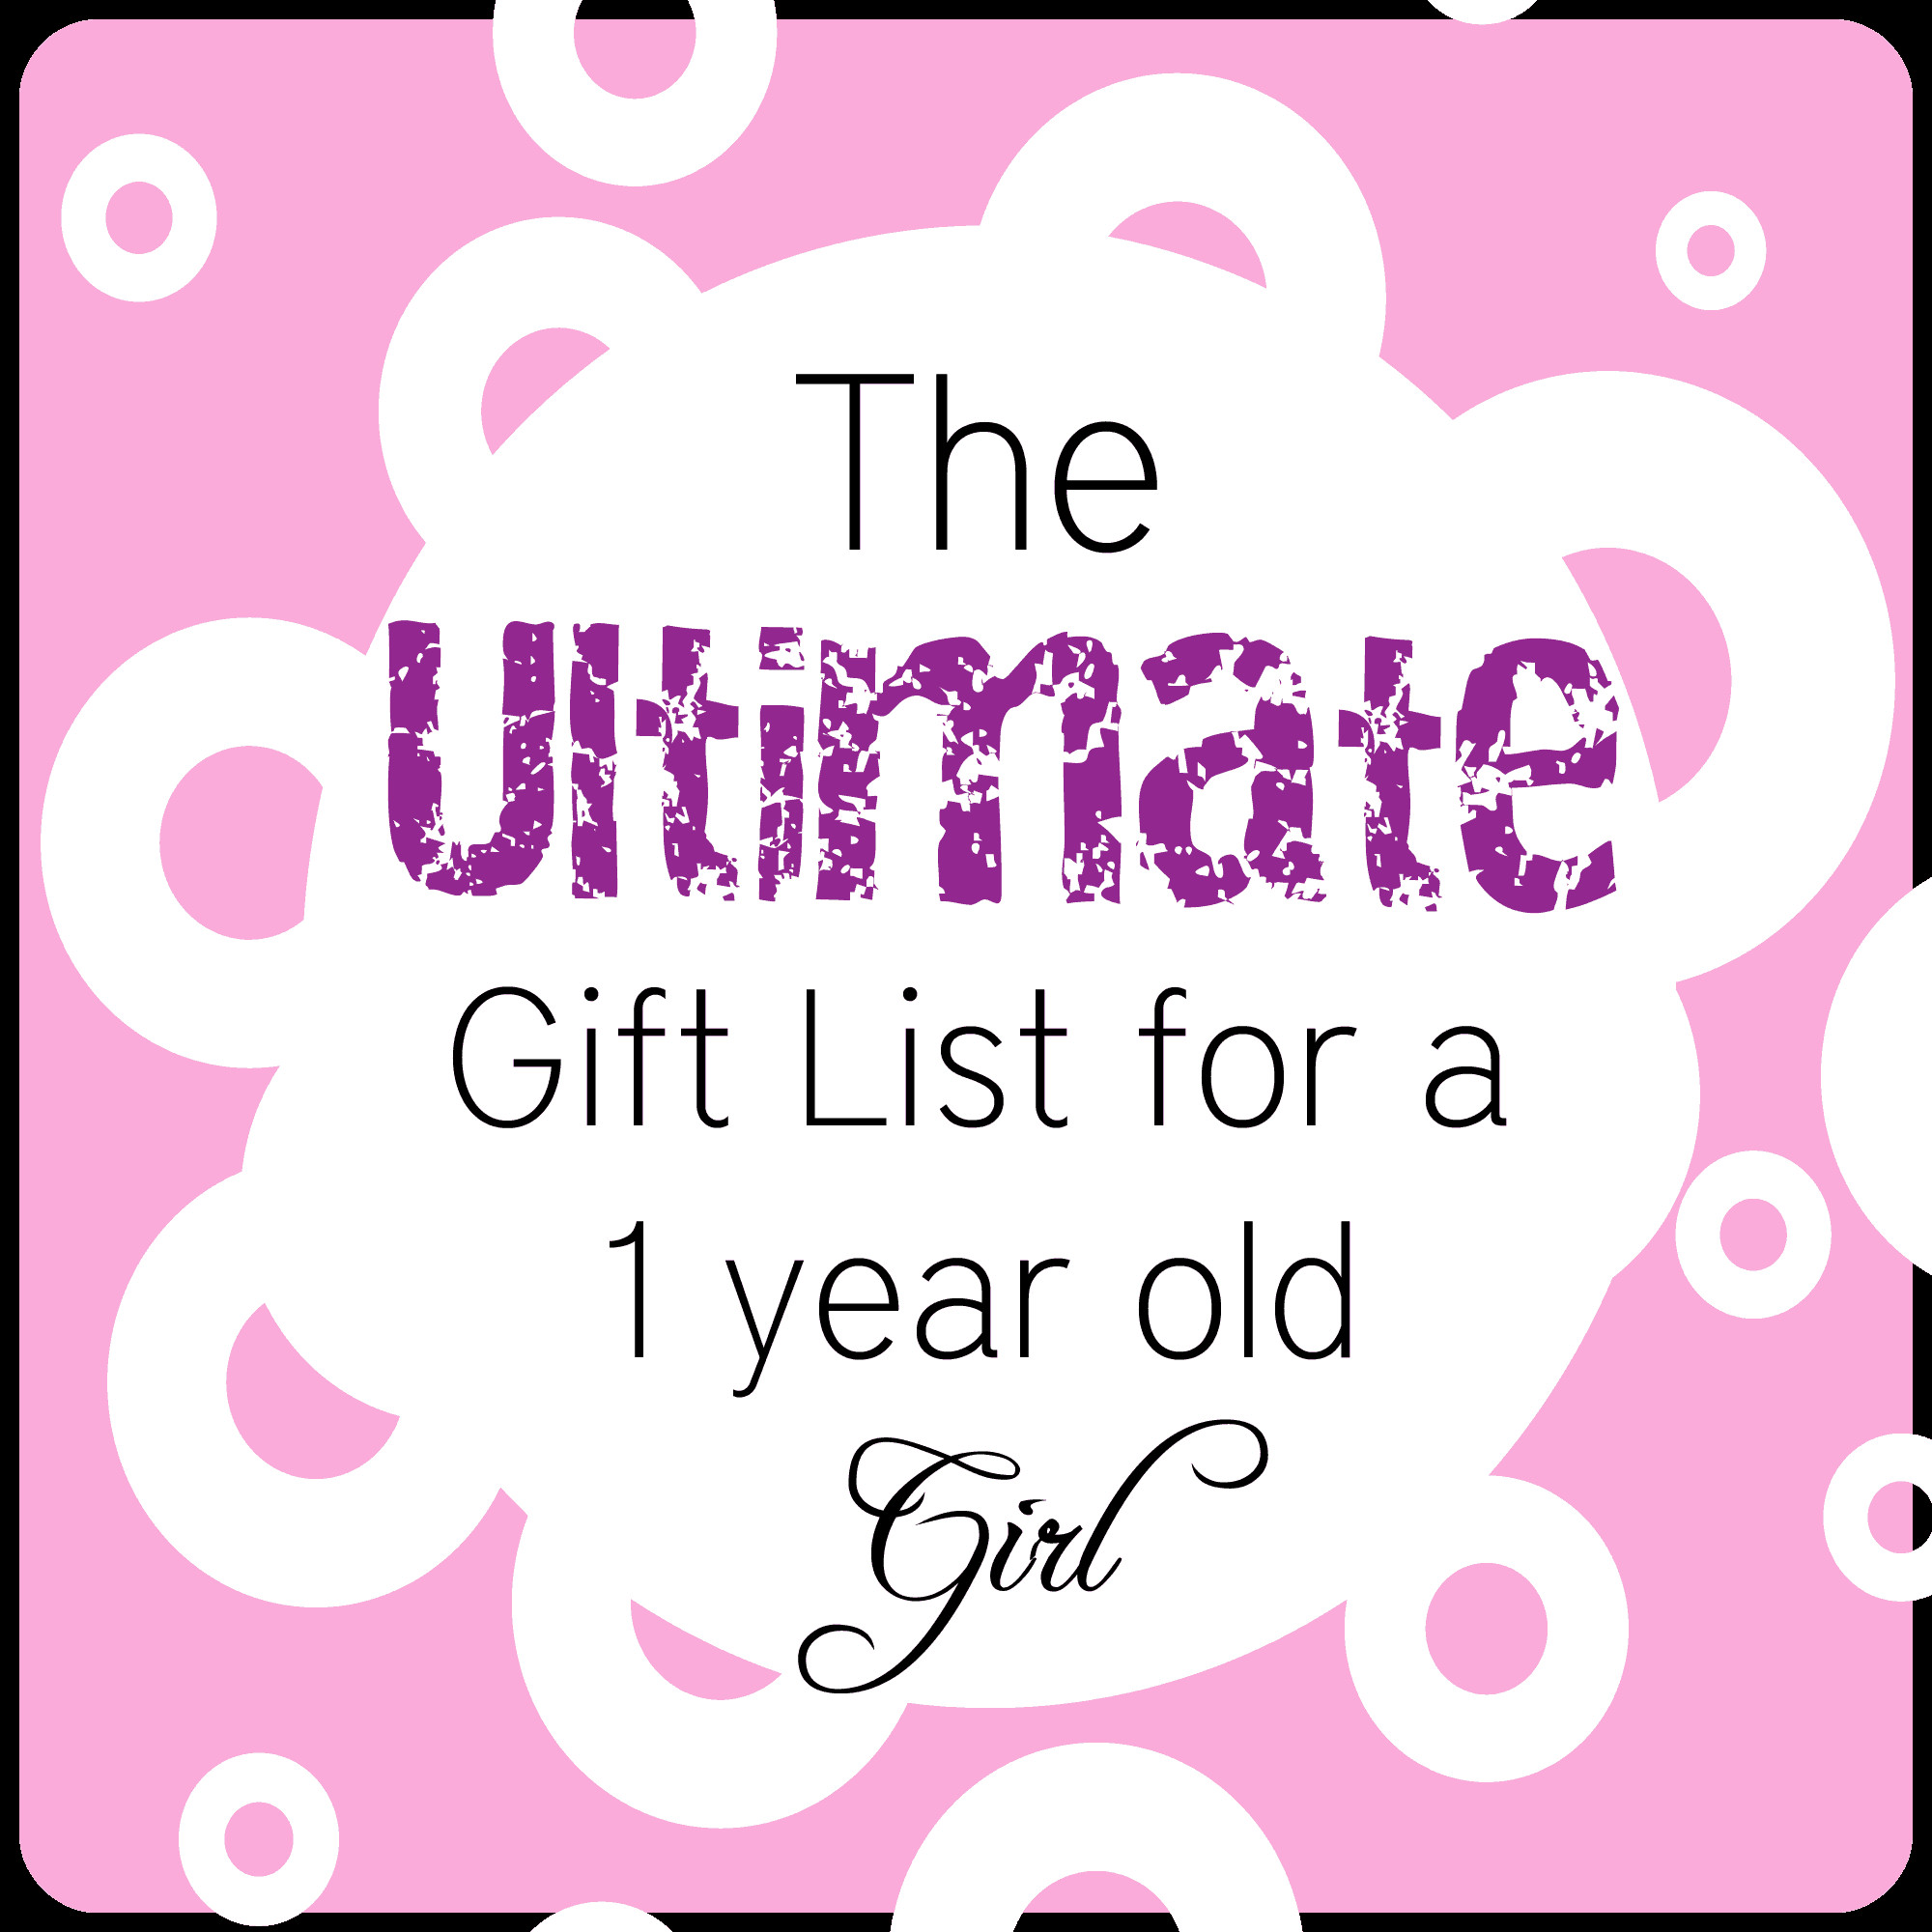 One Year Old Baby Girl Gift Ideas
 The Ultimate List of Gift Ideas for a 1 Year Old Girl